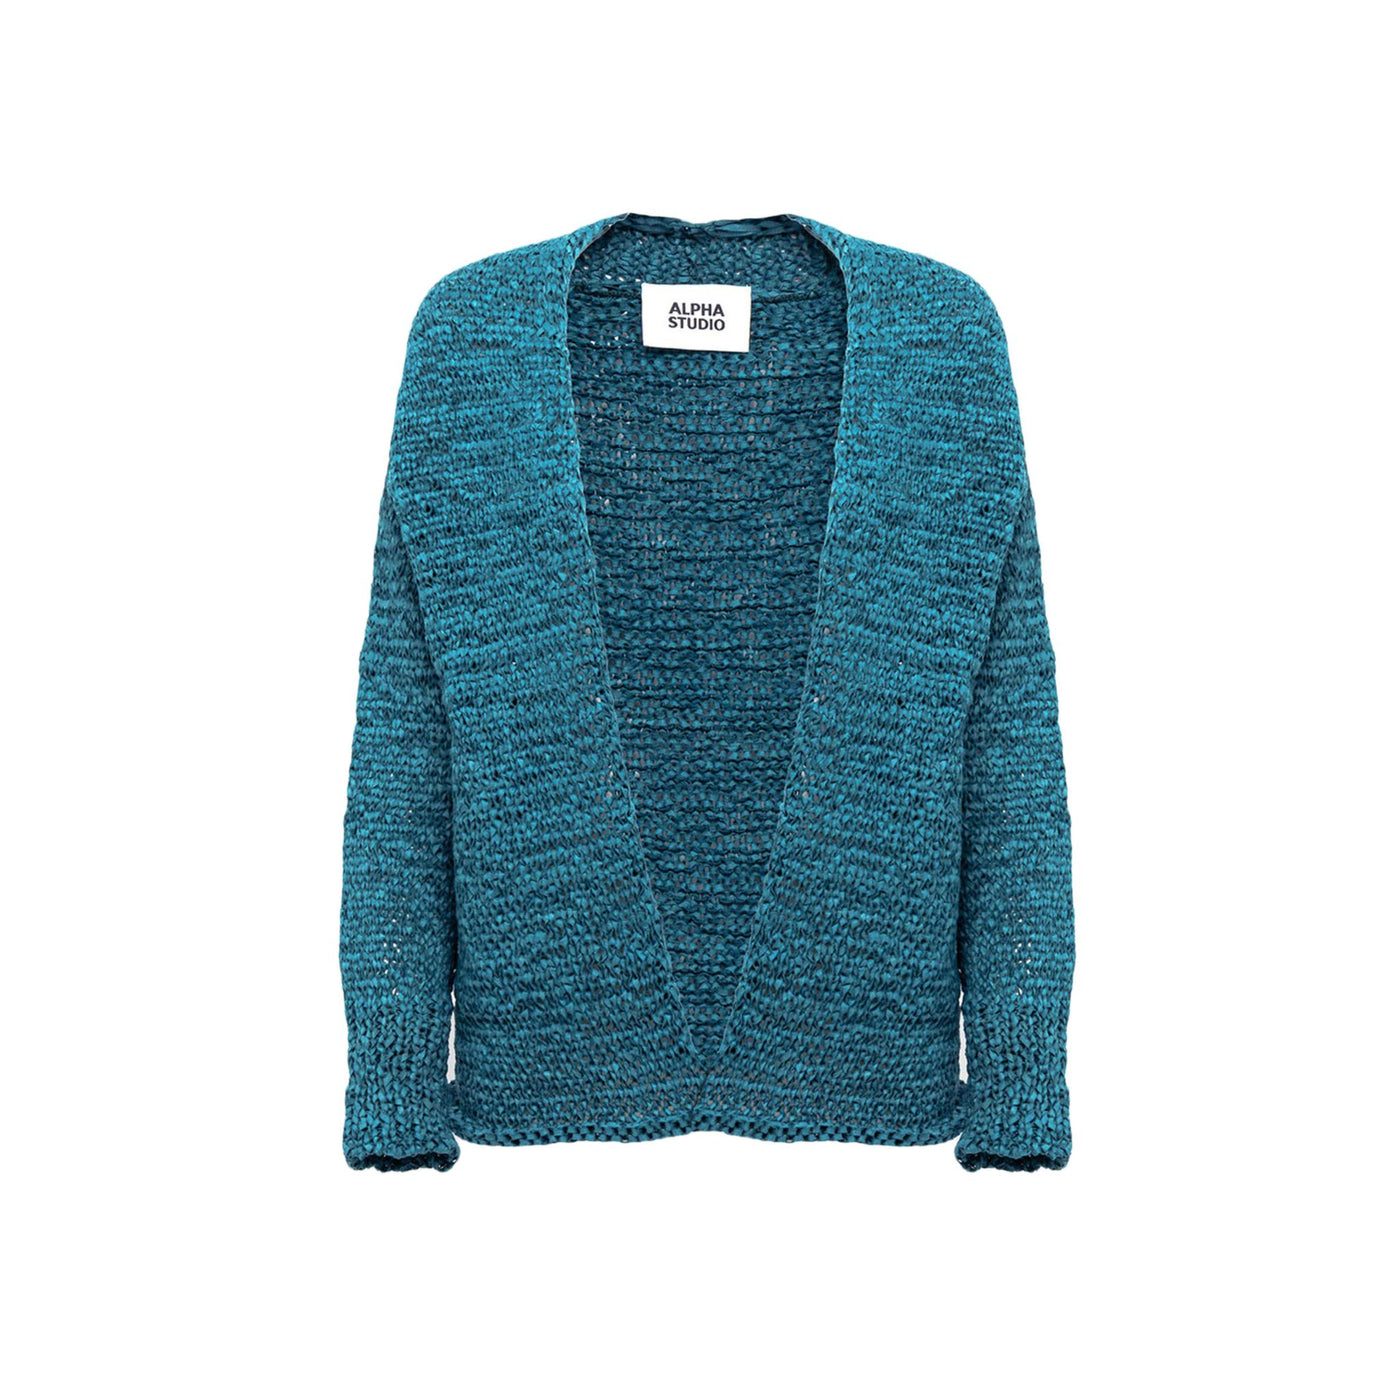 Women's cardigan with woven pattern